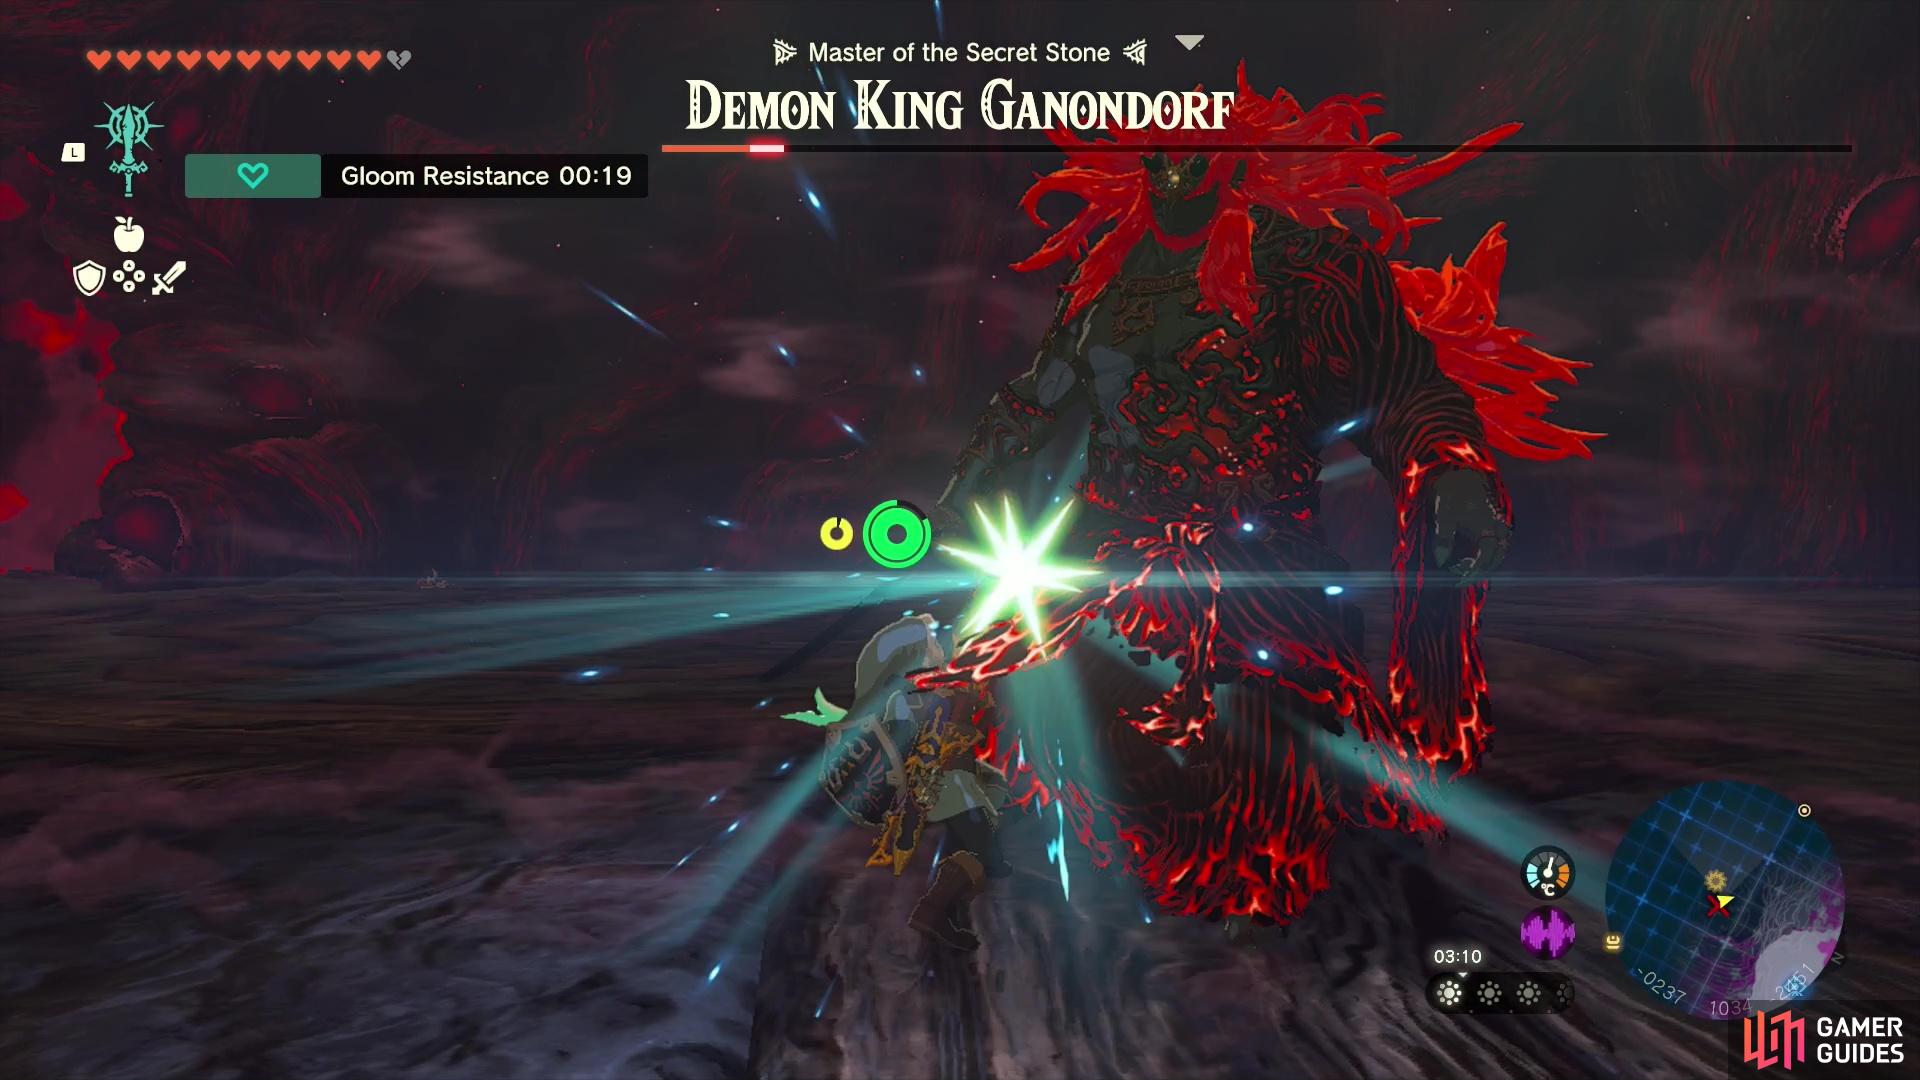 We didn’t think it was possible, but Ganondorf becomes even more evil and gloomy in his third phase!